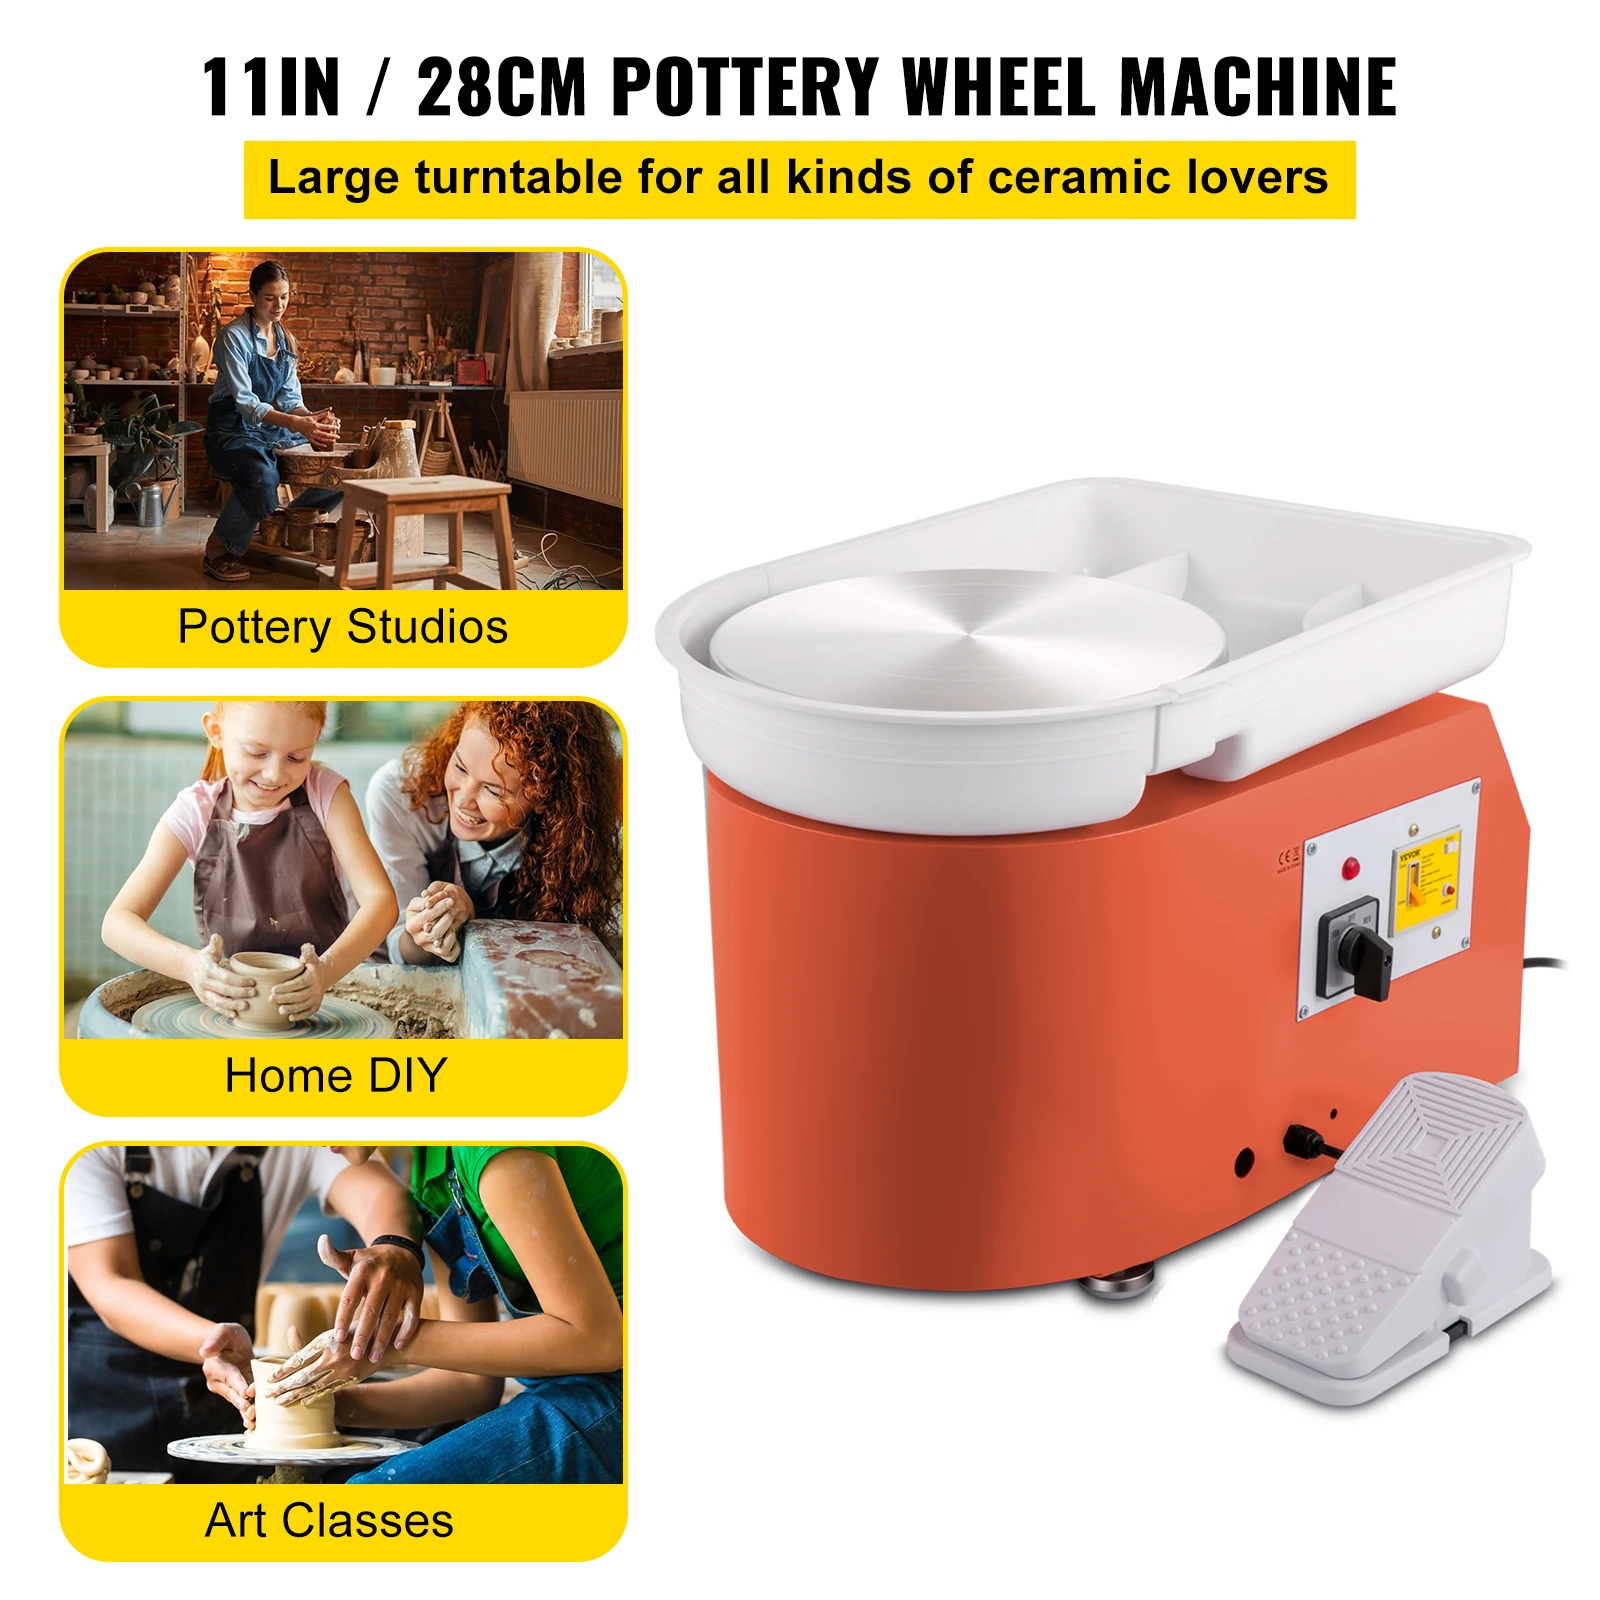 

VEVOR Electric Pottery Wheel Machine 28cm 350W Manual Handle & Foot Pedal for School Ceramic Clay Working Forming DIY Art Craft